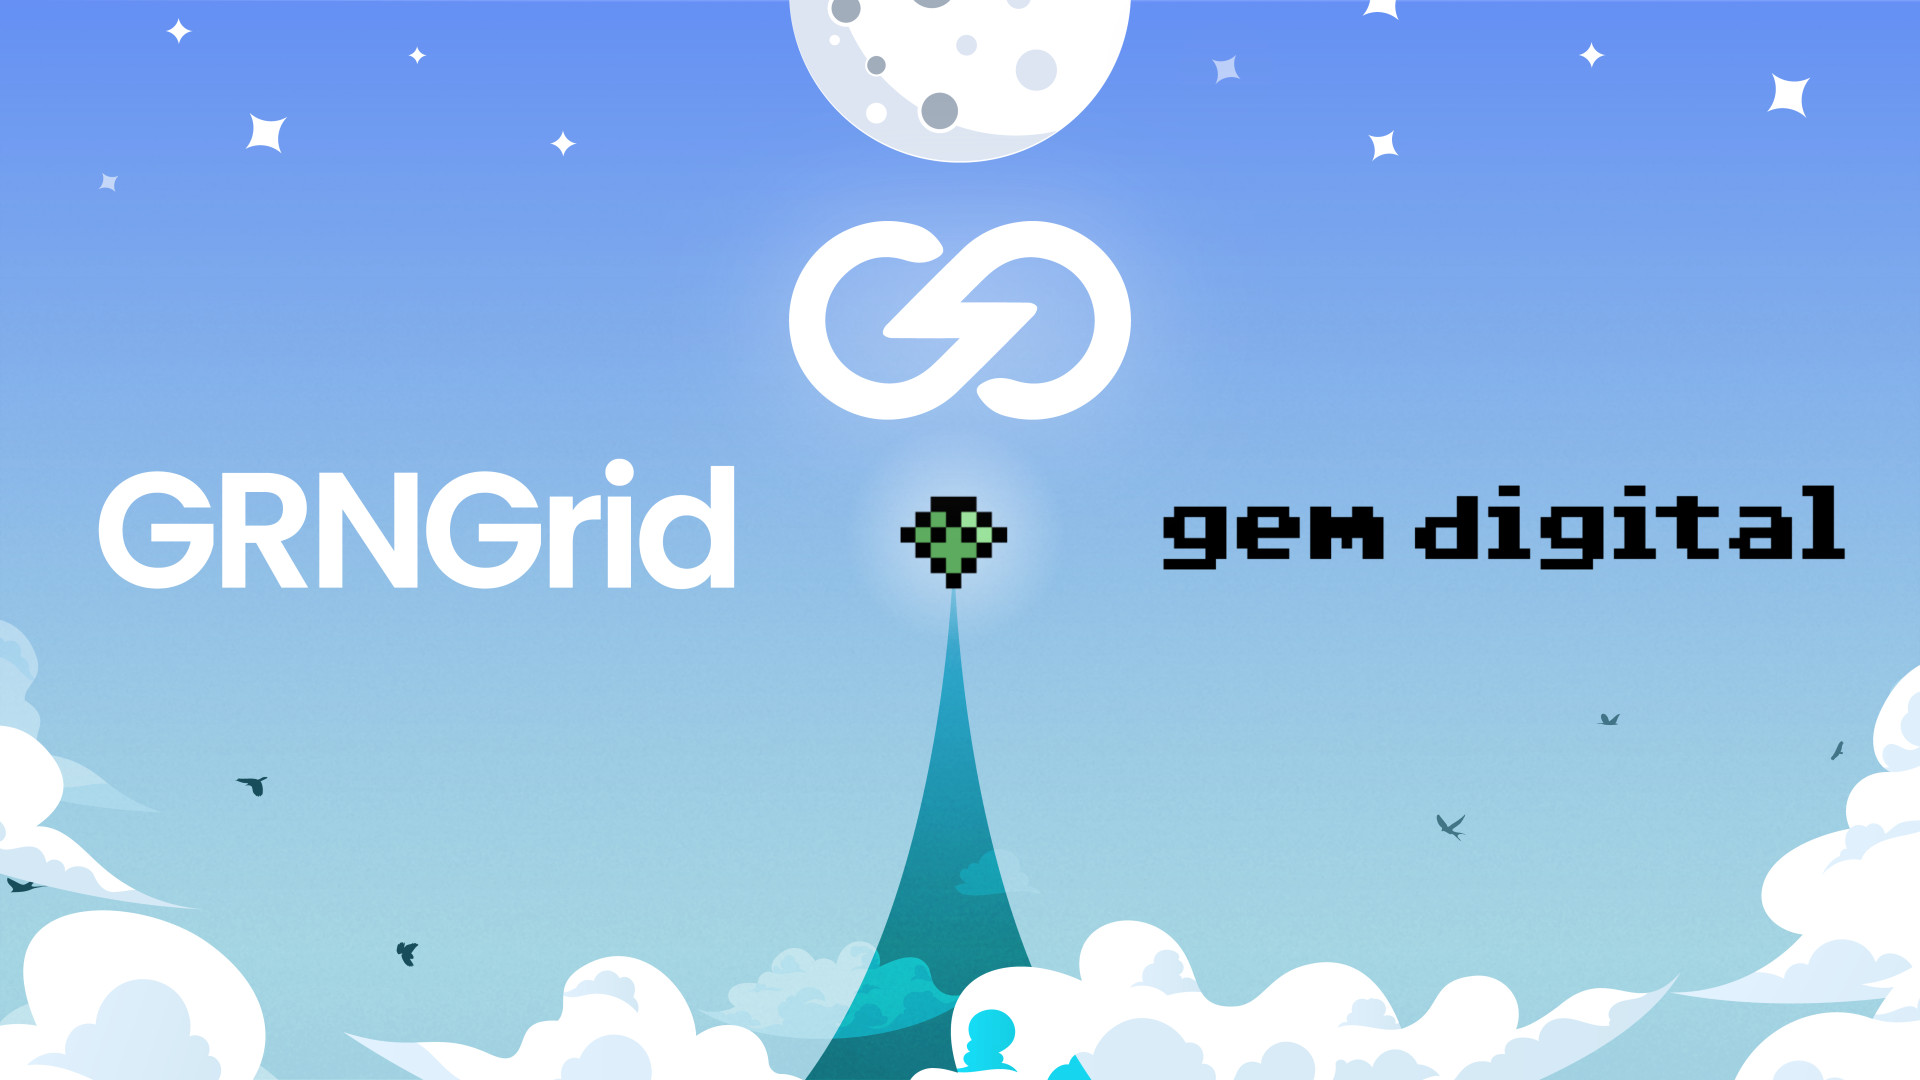 GRNGrid secures 50 million USD investment Commitment from GEM Digital – Blockchain News, Opinion, TV and Jobs